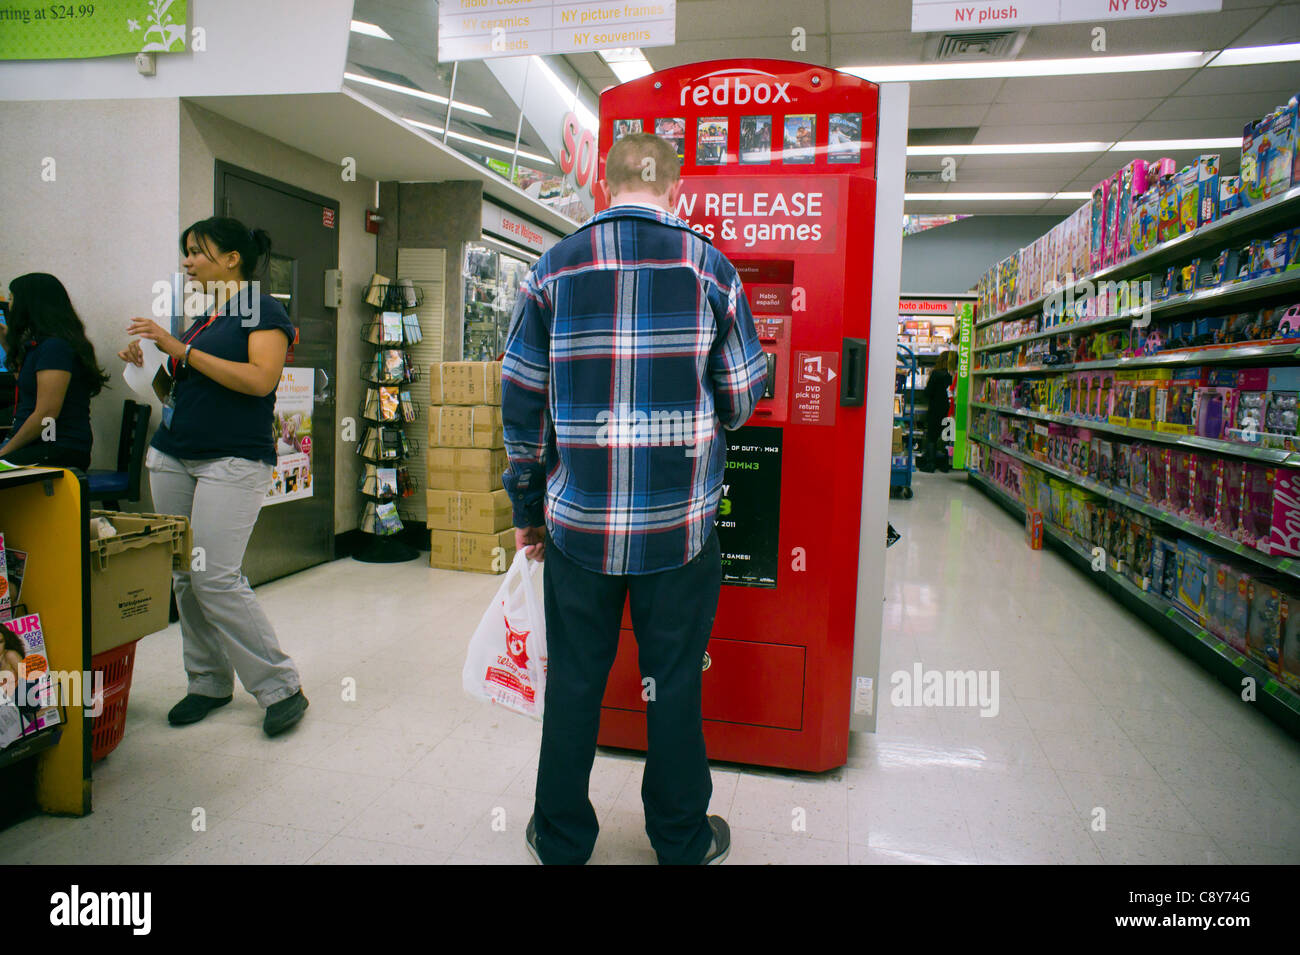 A customer uses a self-service Redbox video rental kiosk, seen in a Walgreen's drug store in New York Stock Photo